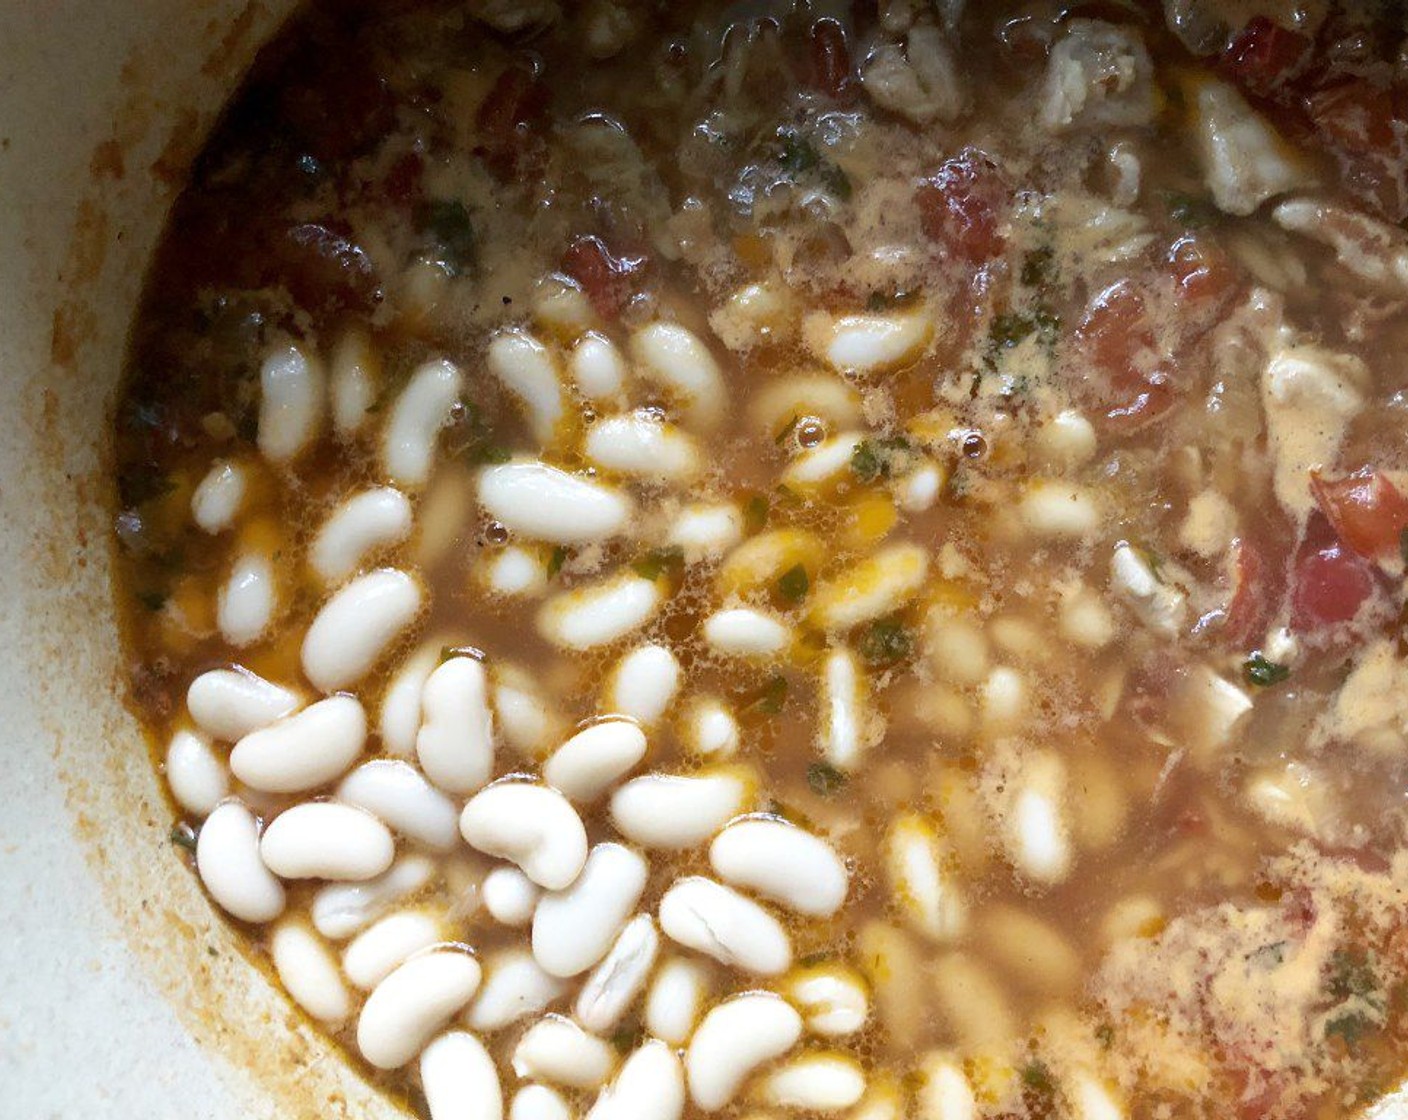 step 7 Add the Cannellini White Kidney Beans (1 can) and simmer for 2 minutes or until heated through. Remove from heat.